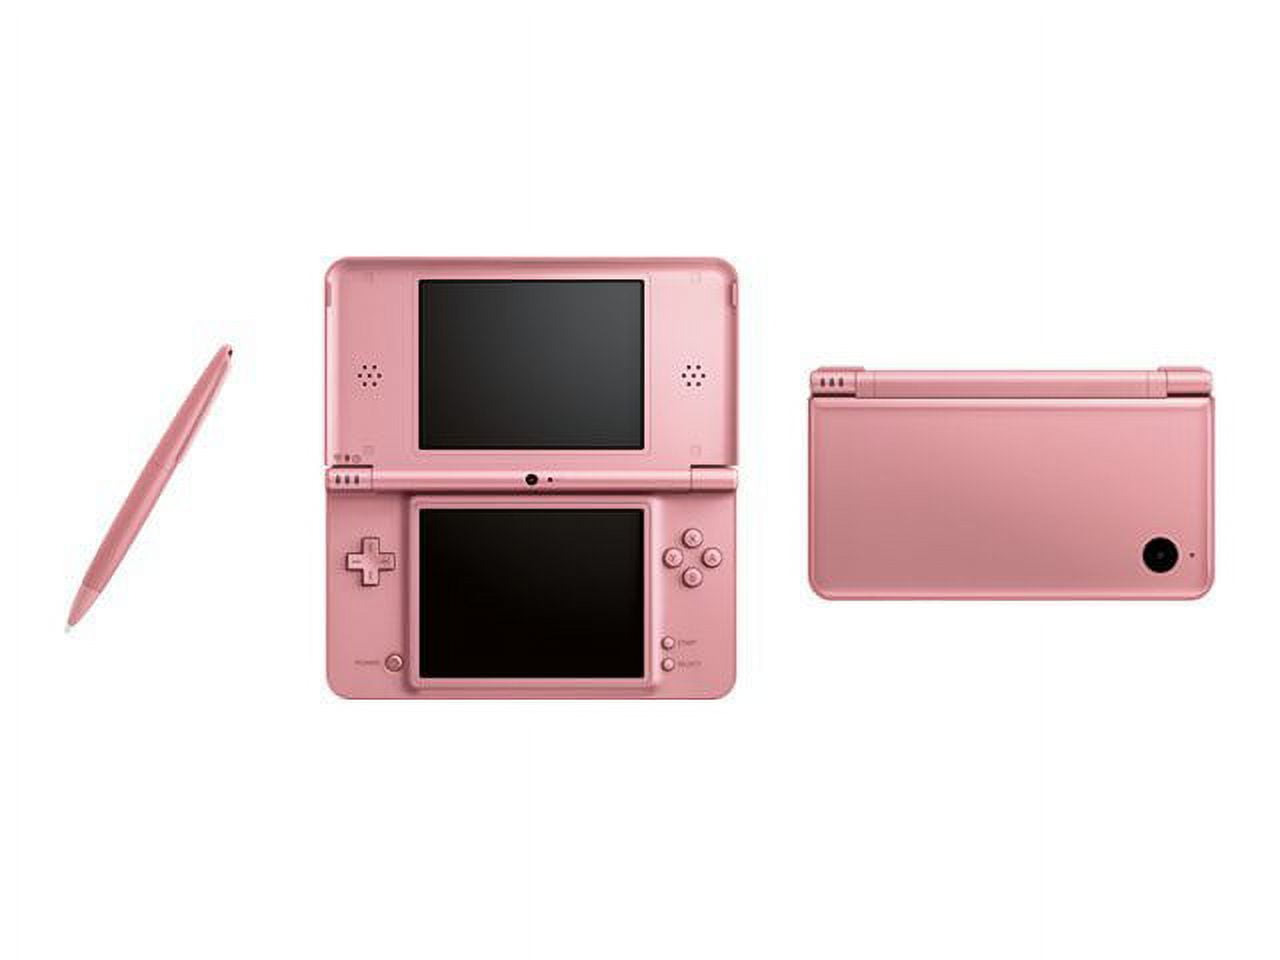 Nintendo DSi XL gets official North American release date